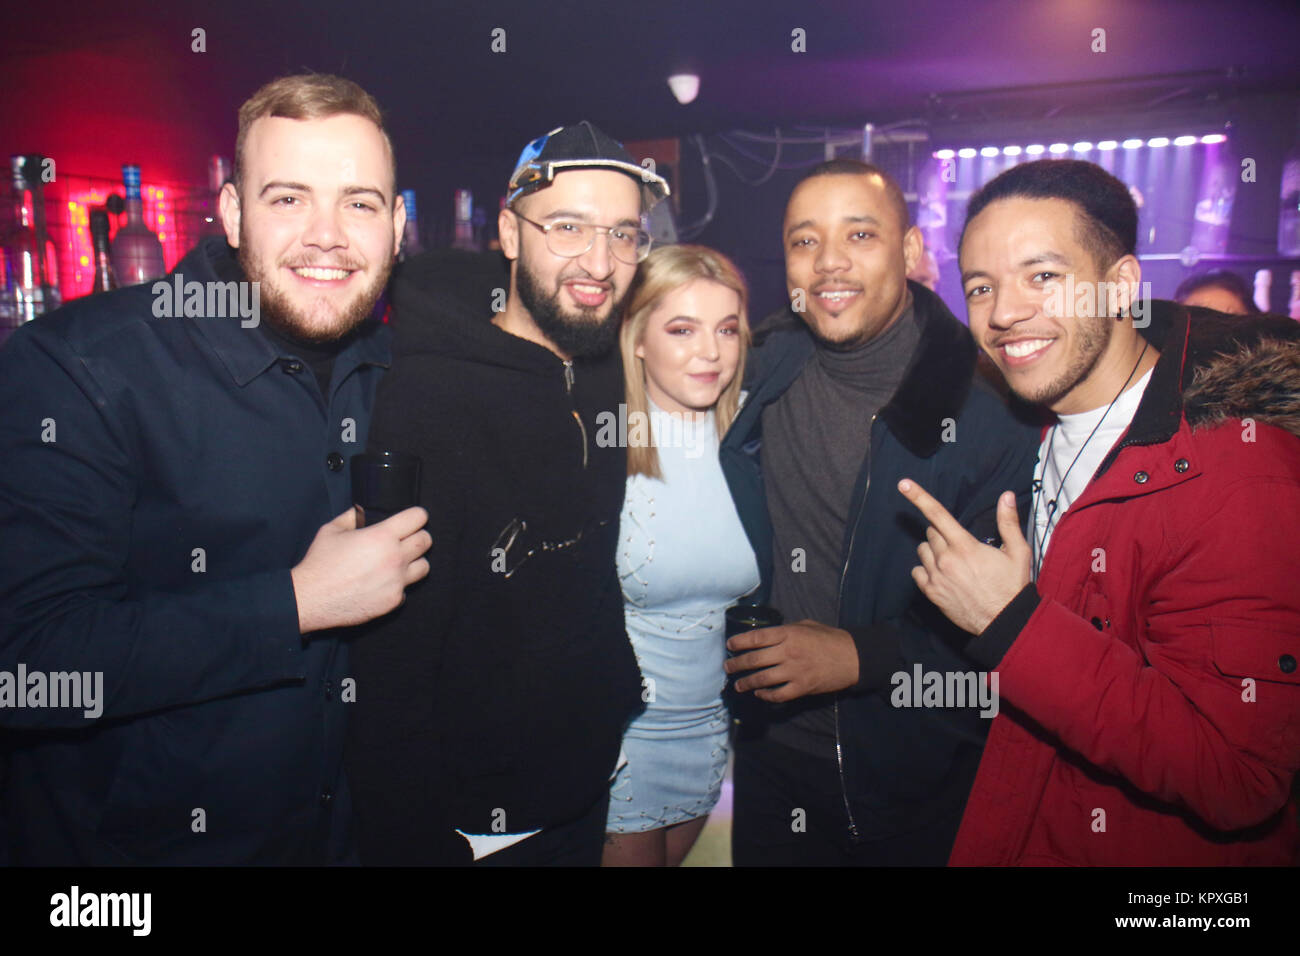 London, UK. 16th December, 2017. X Factor winner and Rak-Su star Mustafa Rahimtulla returns to his former workplace Hydeout 2.0 for night out with friends enjoying some weekend downtime after X Factor whirlwind. Mus previously worked at the club as a promoter. He posed for pictures with groups of fans before being escorted to the toilet by a doorman. Mustafa partied with his friends and former colleagues. Earlier in the day he ate out at Watford's Wagamamas alongside bandmates Myles Stephenson and Jamal Shurland. Credit: Ayeesha Walsh/Alamy Live News Stock Photo